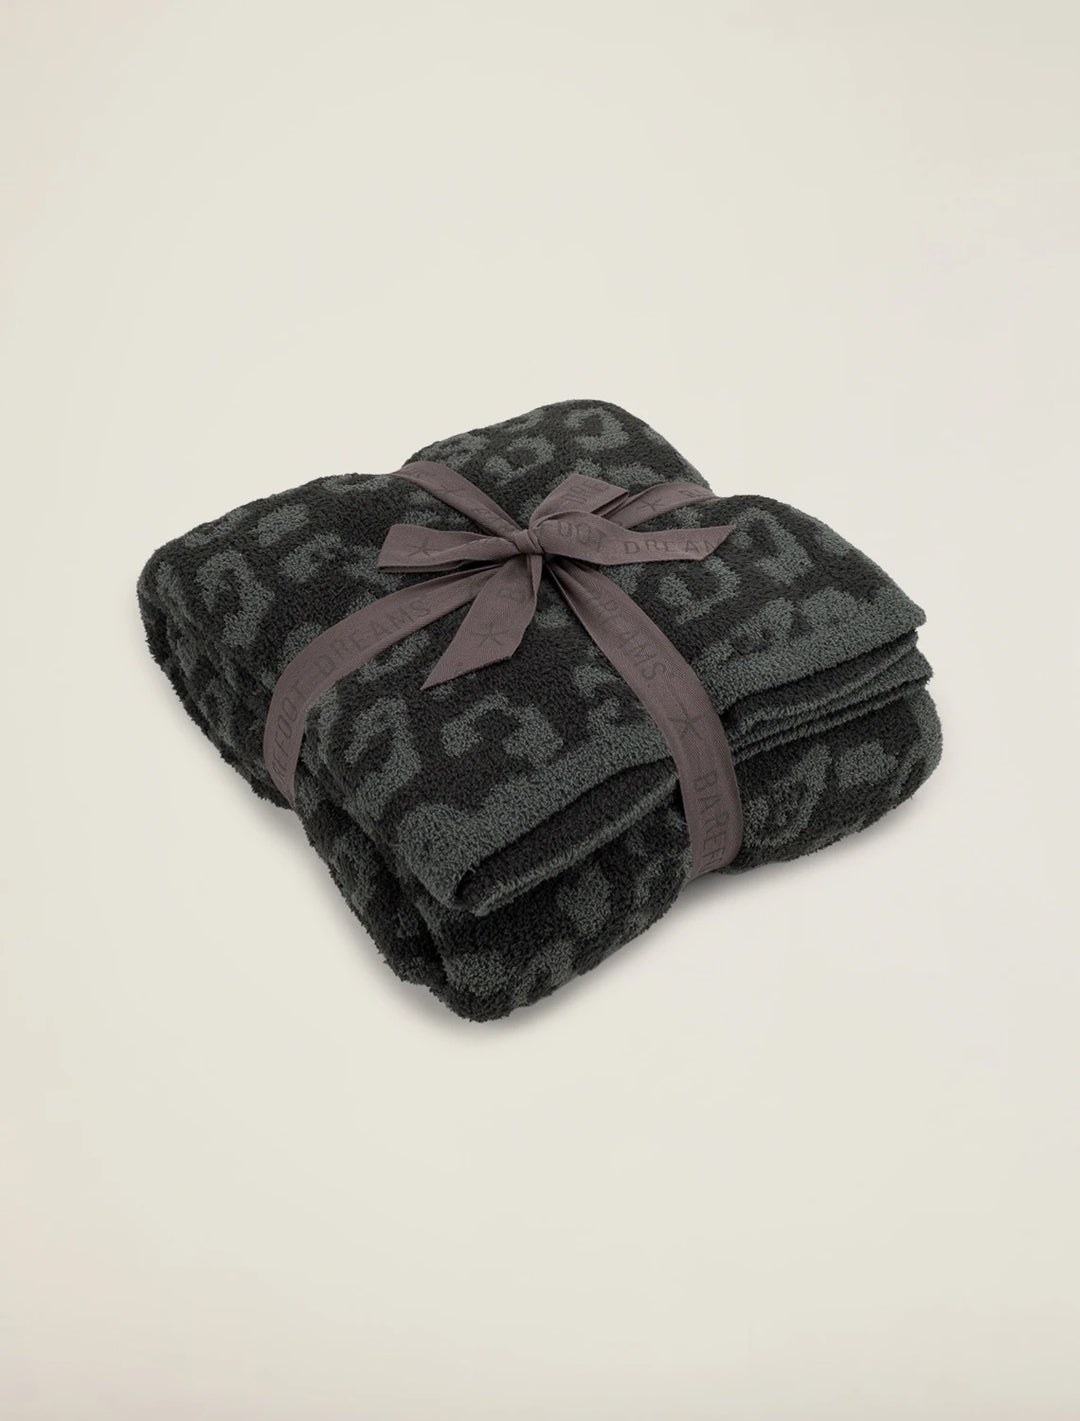 Barefoot Dreams - CozyChic Barefoot in the Wild Adult Throw in Graphite/Carbon Leopard